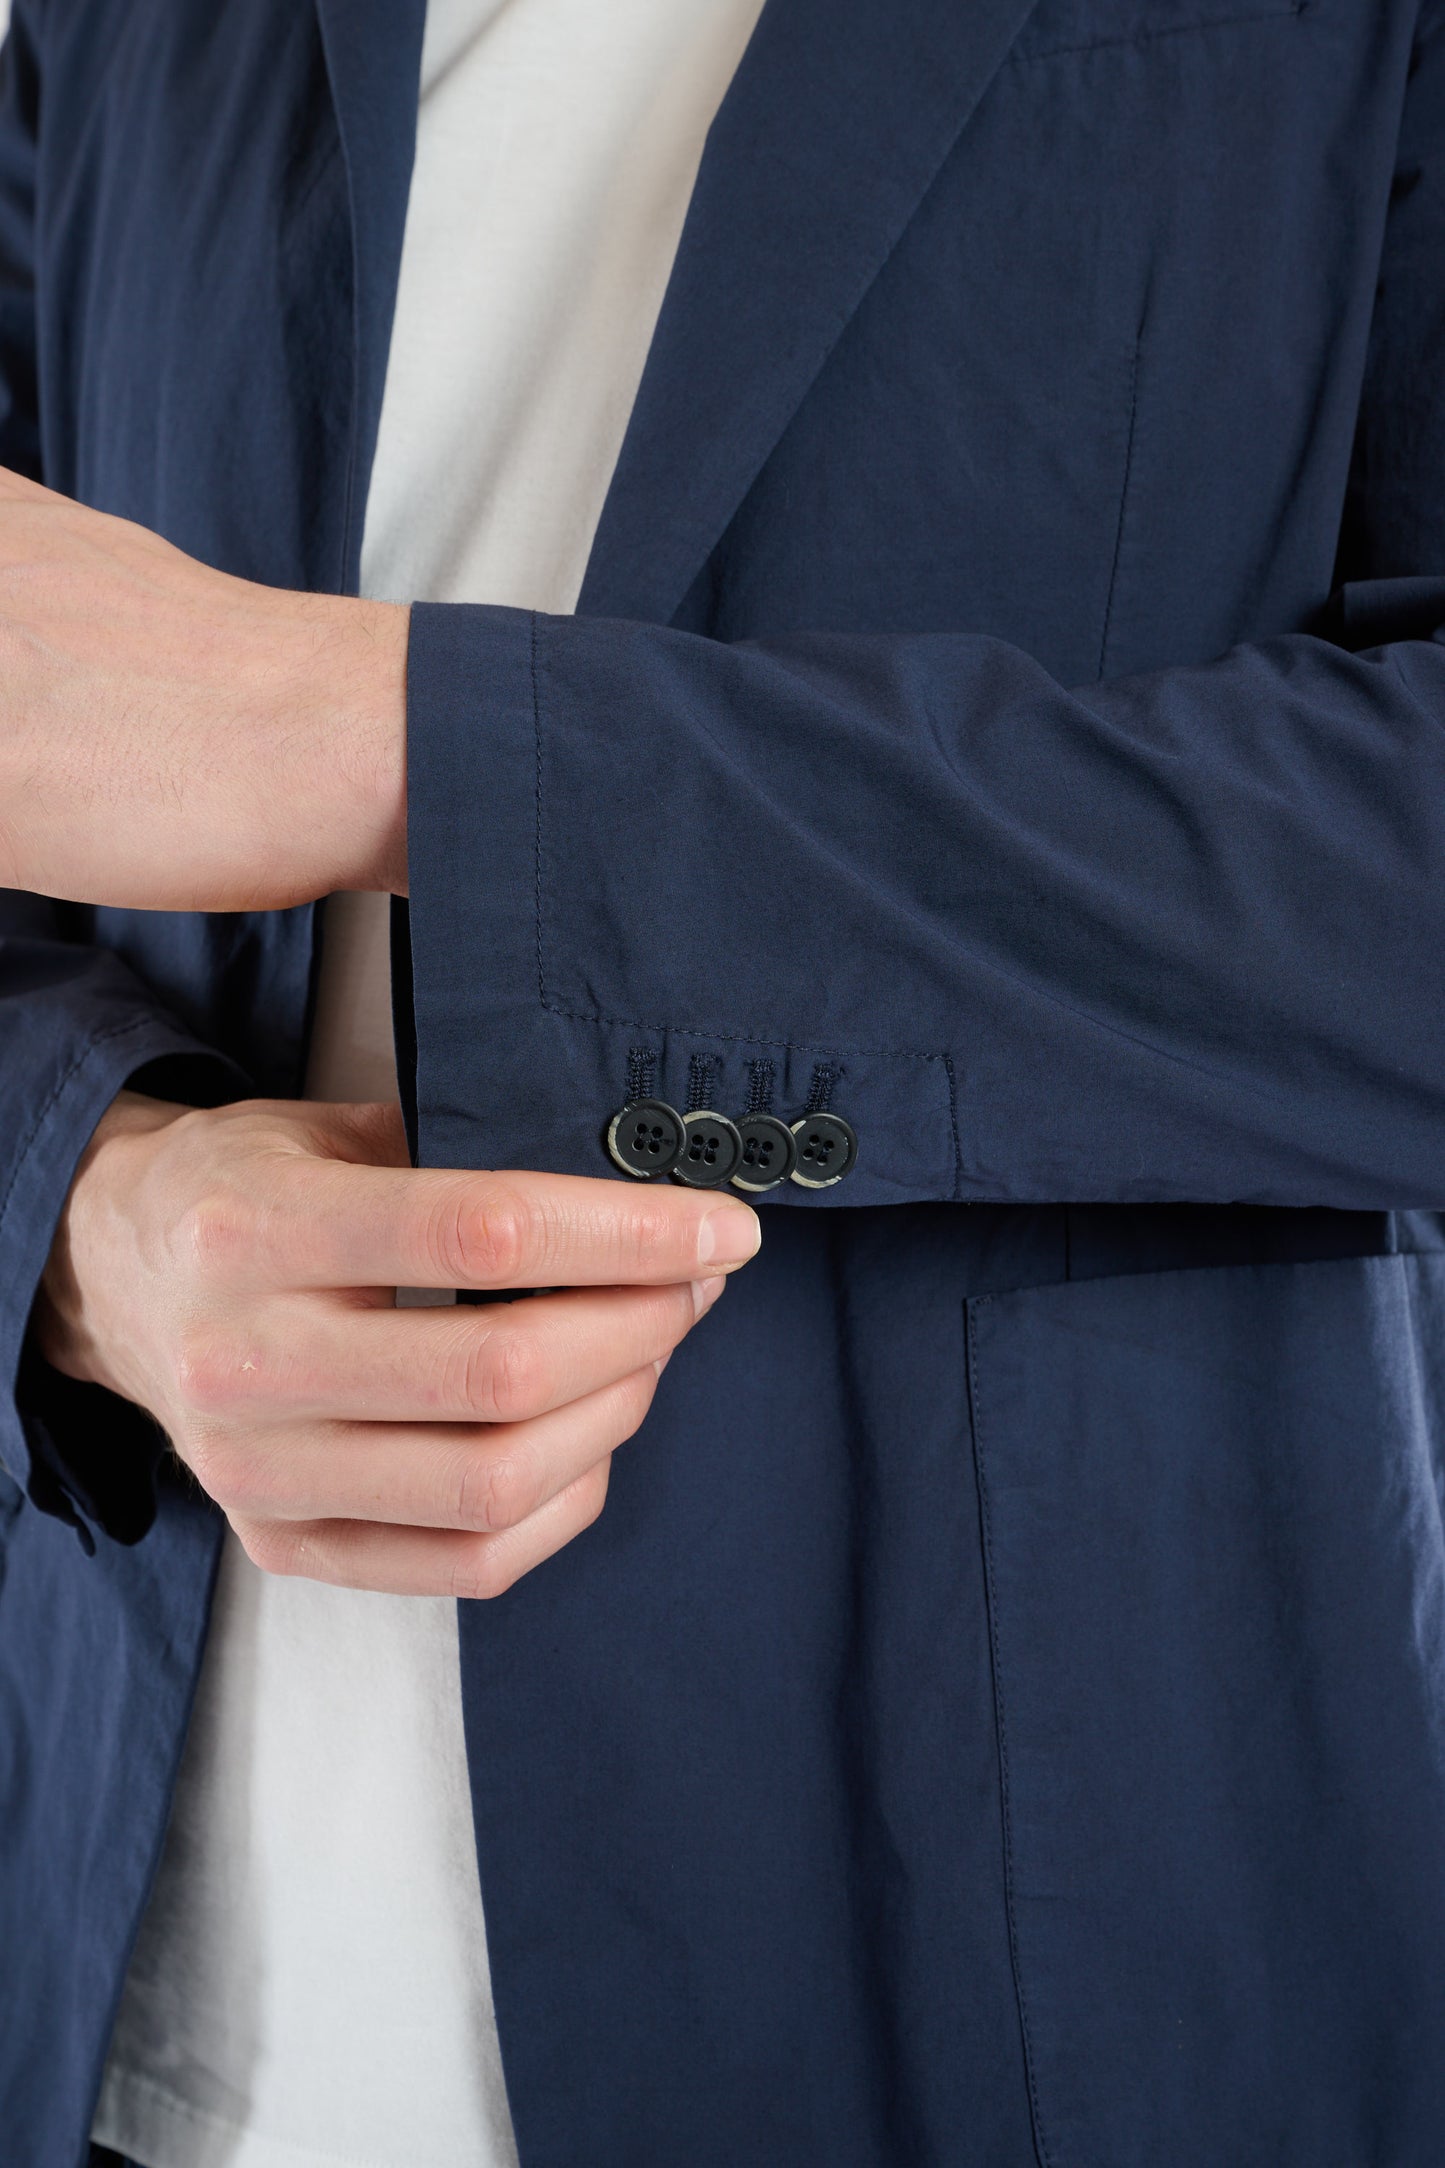 JACKET WITH TWO BUTTONS NAVY